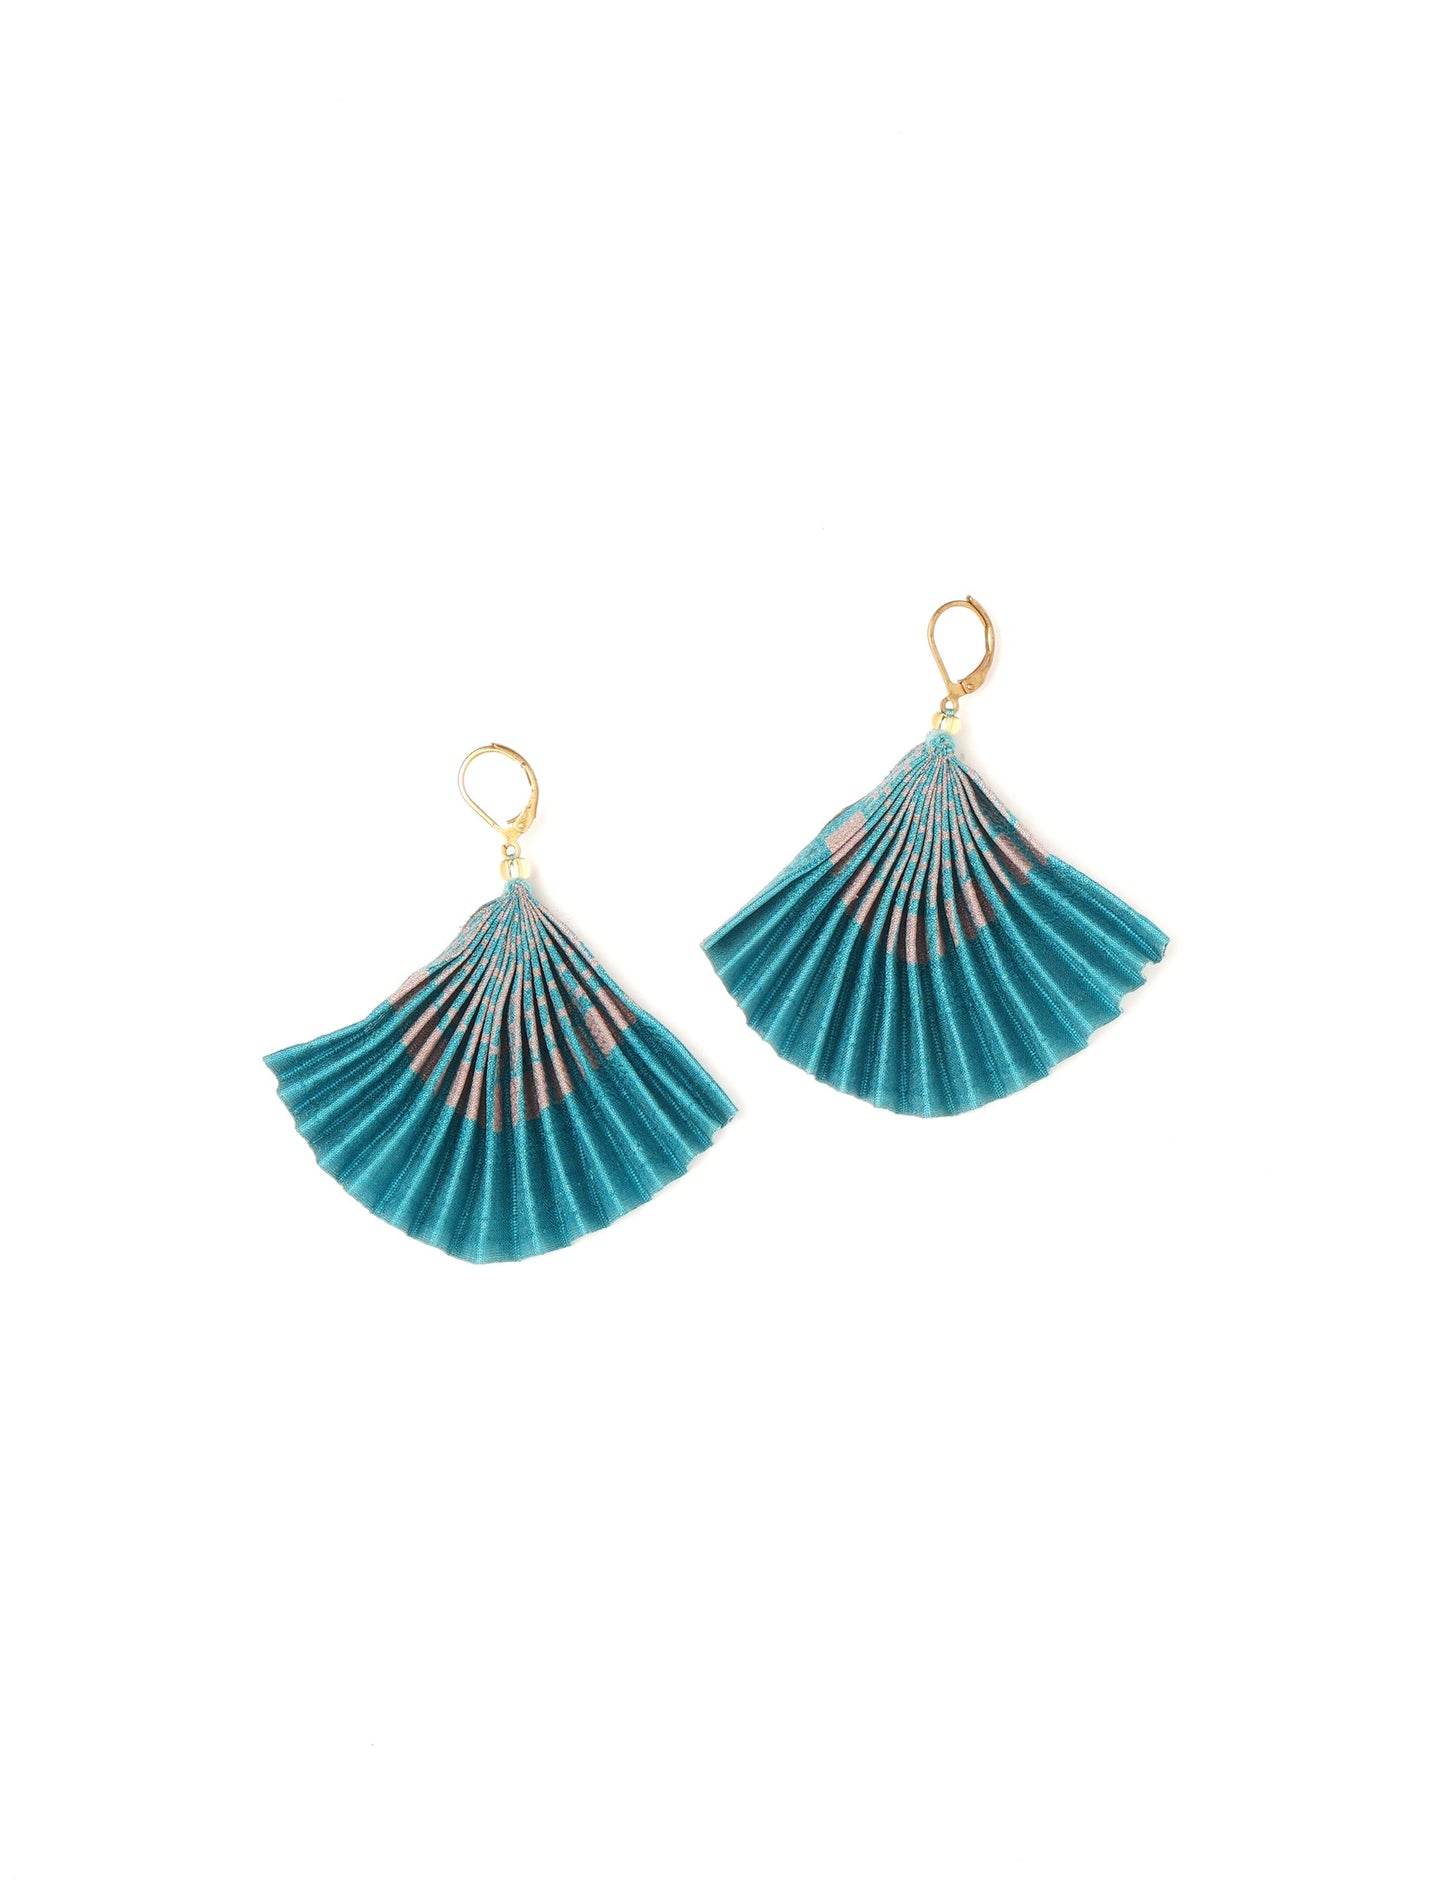 Elevate your style sustainably with our PLEATED EARRINGS – a timeless creation from pre-loved Indian saris, crafted using innovative heat setting techniques. Align with ethical clothing, green fashion, and slow fashion, these earrings are a statement of mindful elegance. Hypoallergy tested metal hooks make them a skin-friendly, sustainable choice.